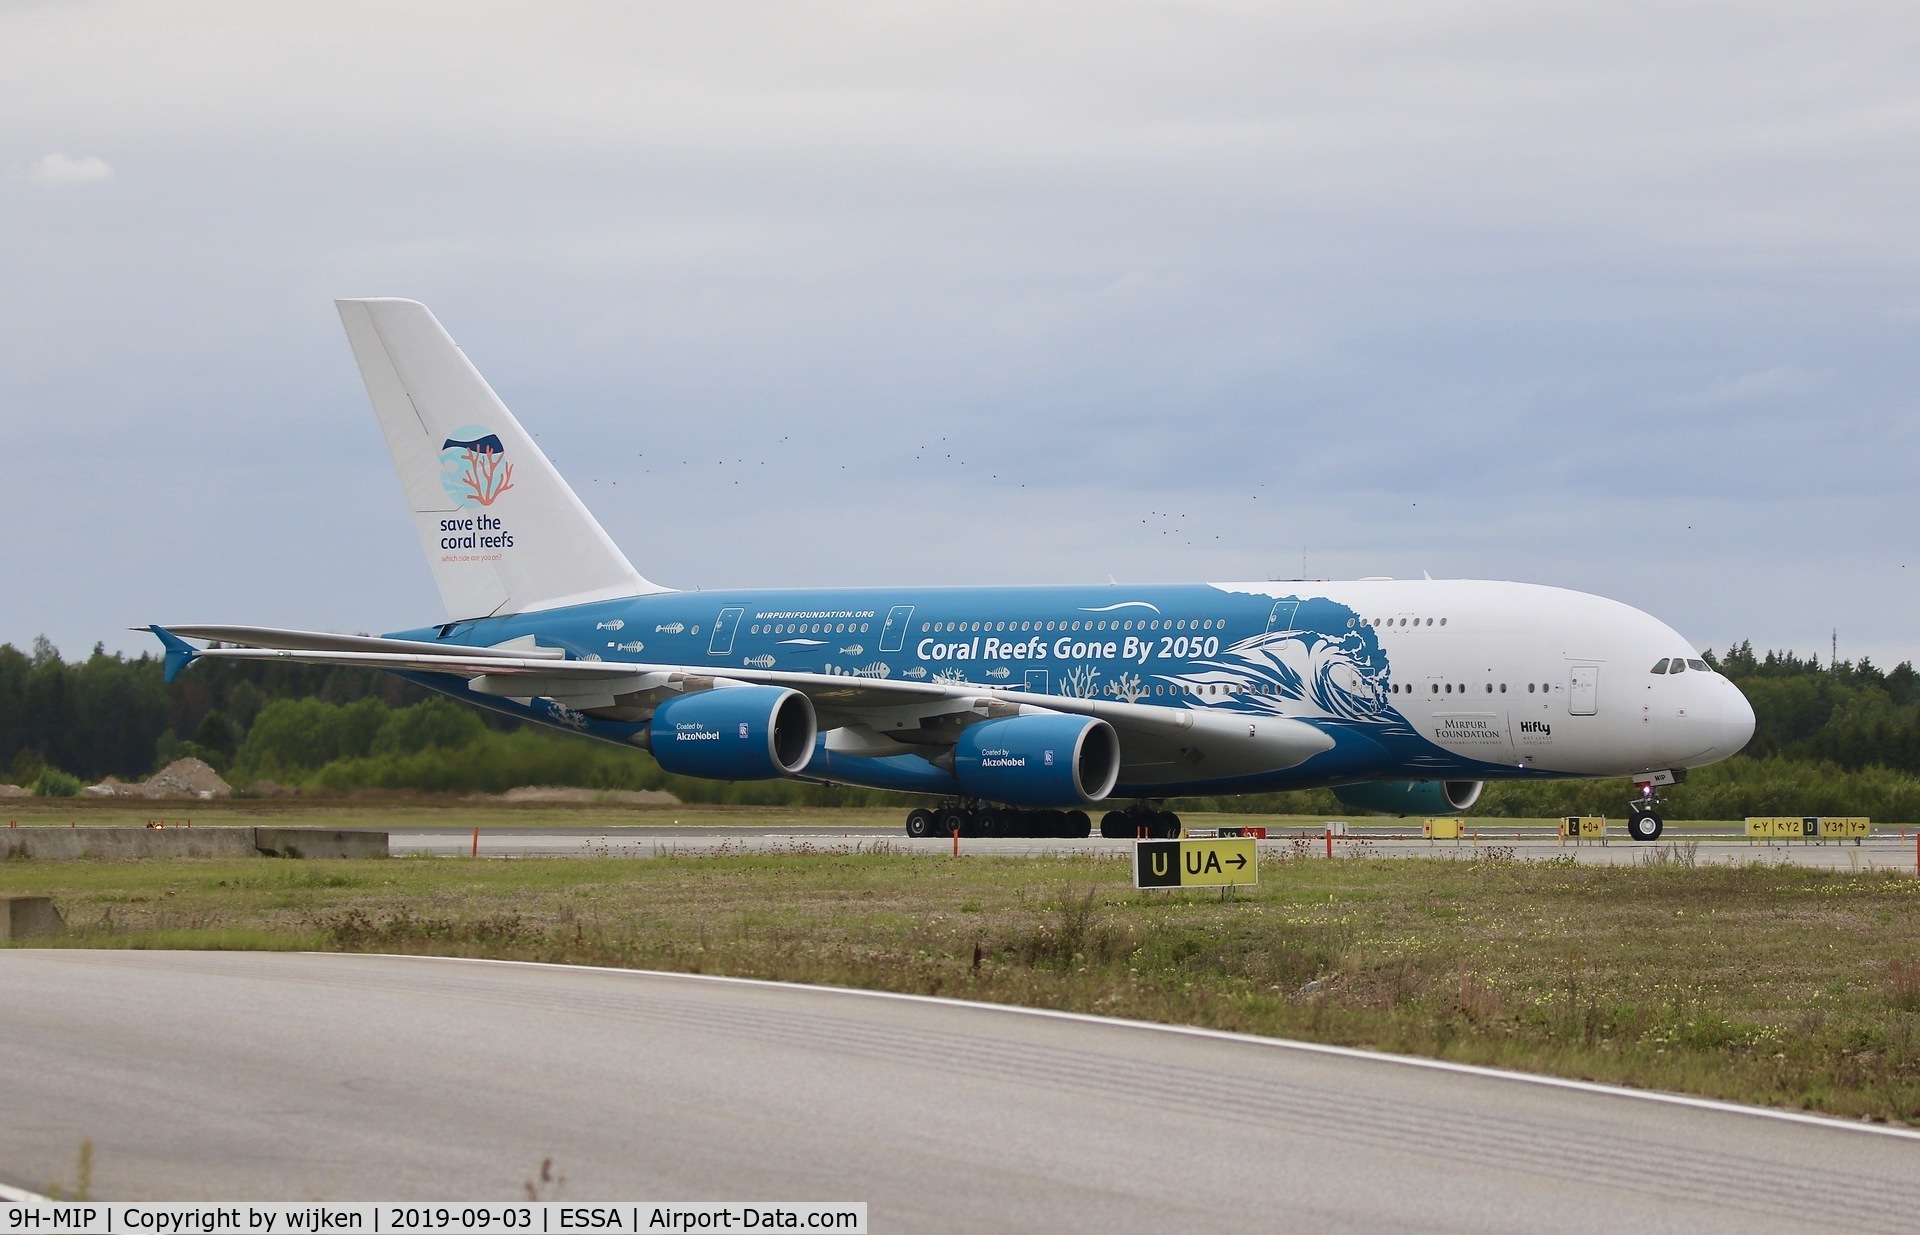 9H-MIP, 2006 Airbus A380-841 C/N 006, Taxiway Z